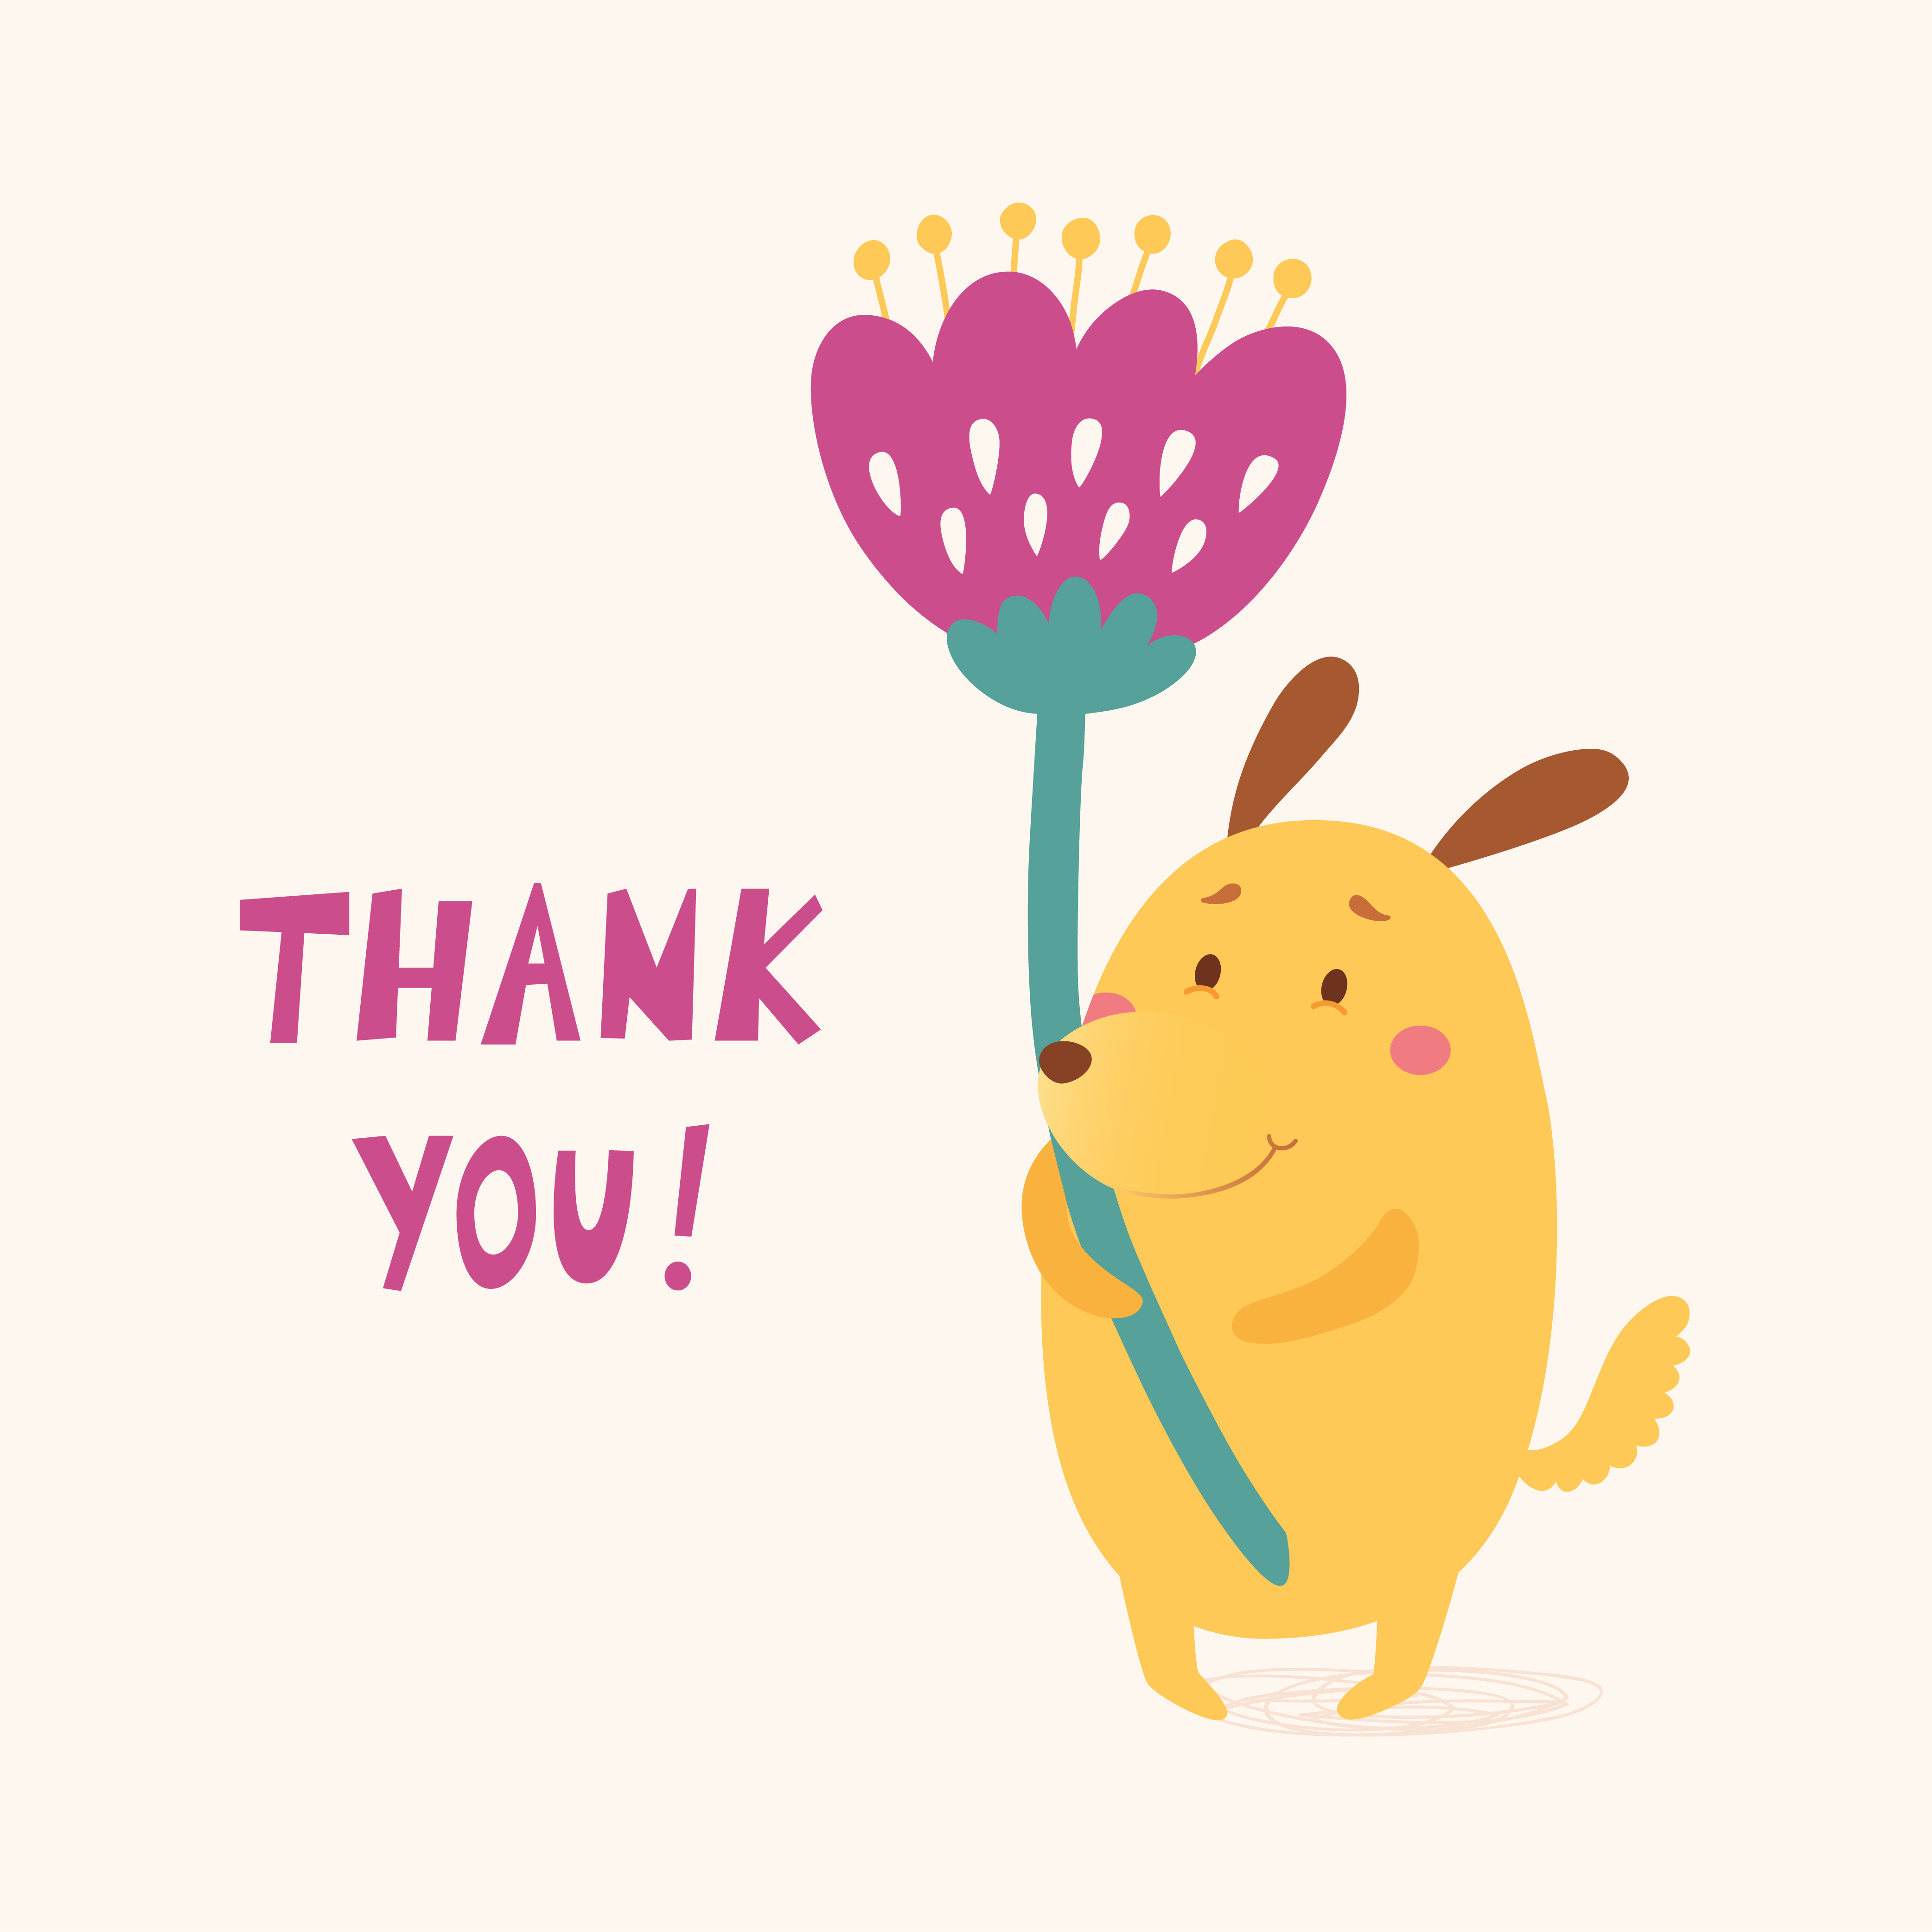 Thank you vector card with cute dog Photoshop brush